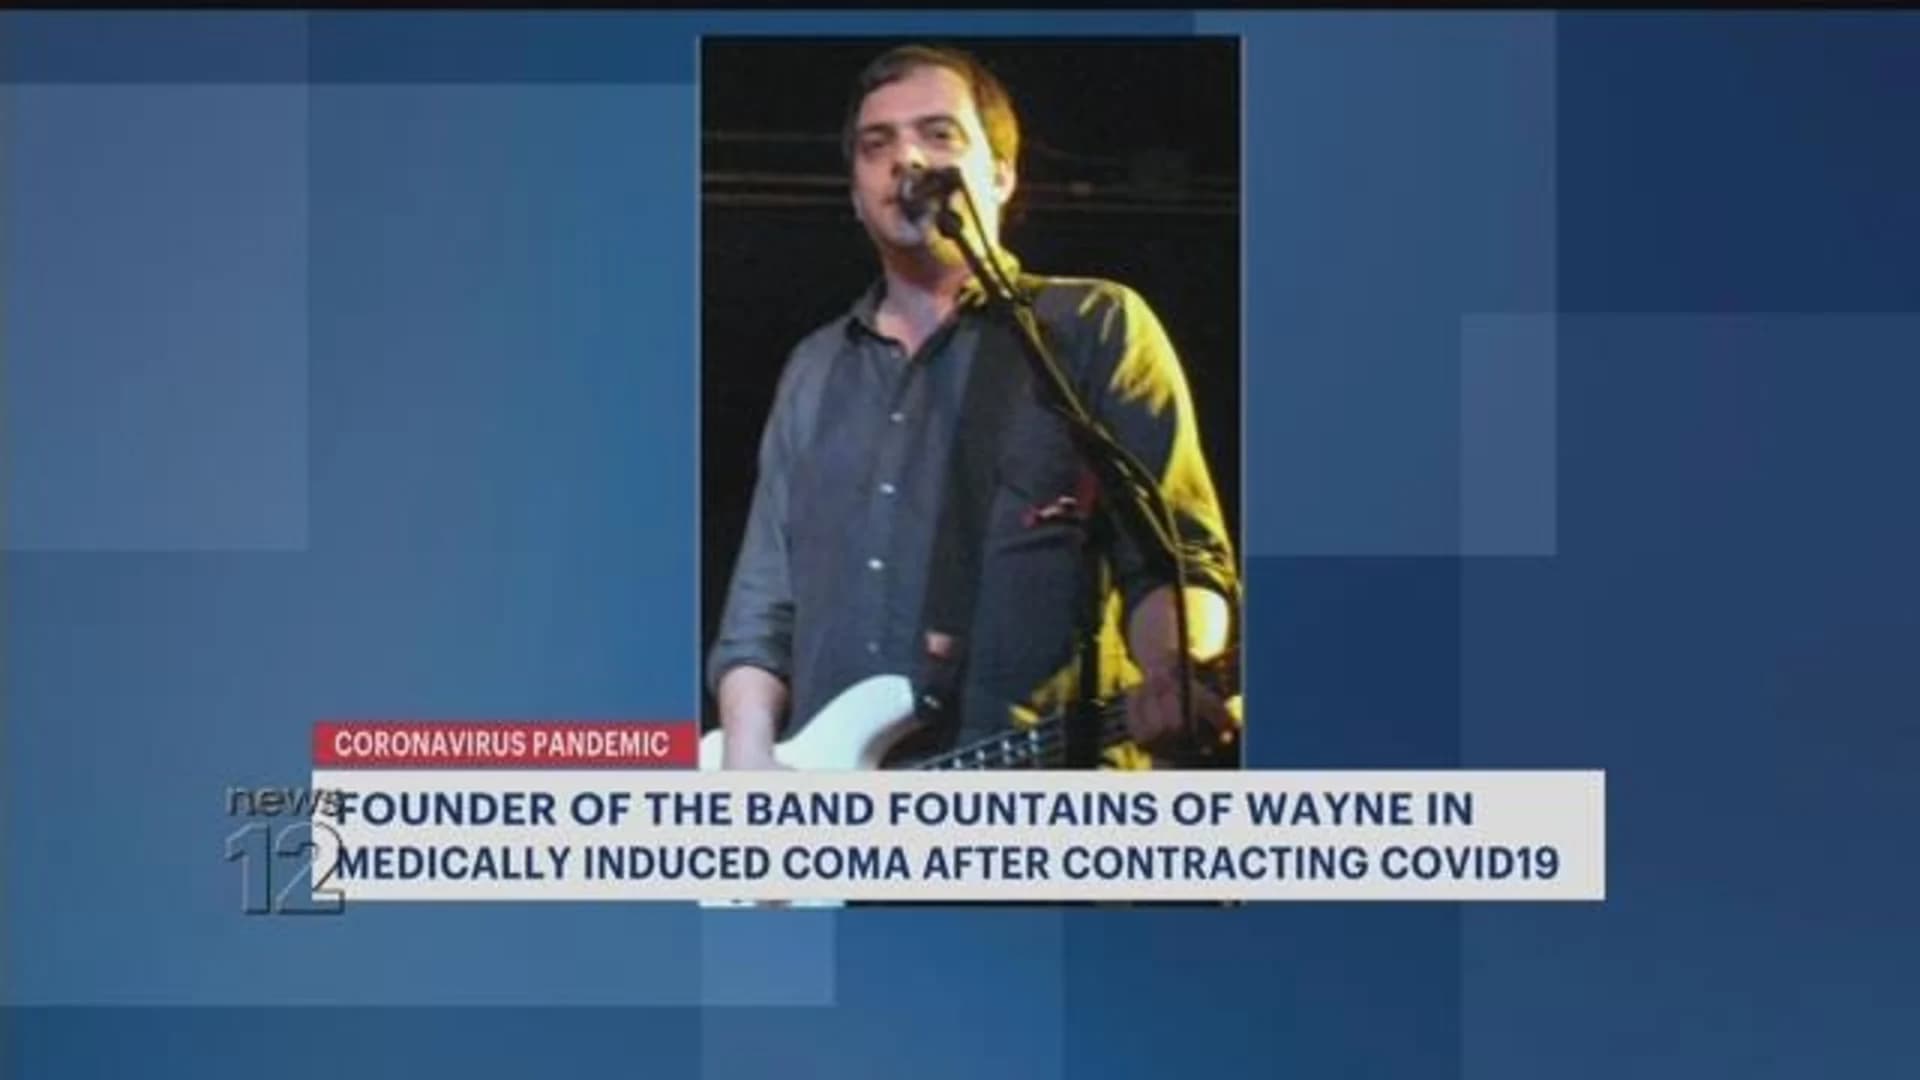 Report: Fountains of Wayne band founder put on ventilator after contracting COVID-19